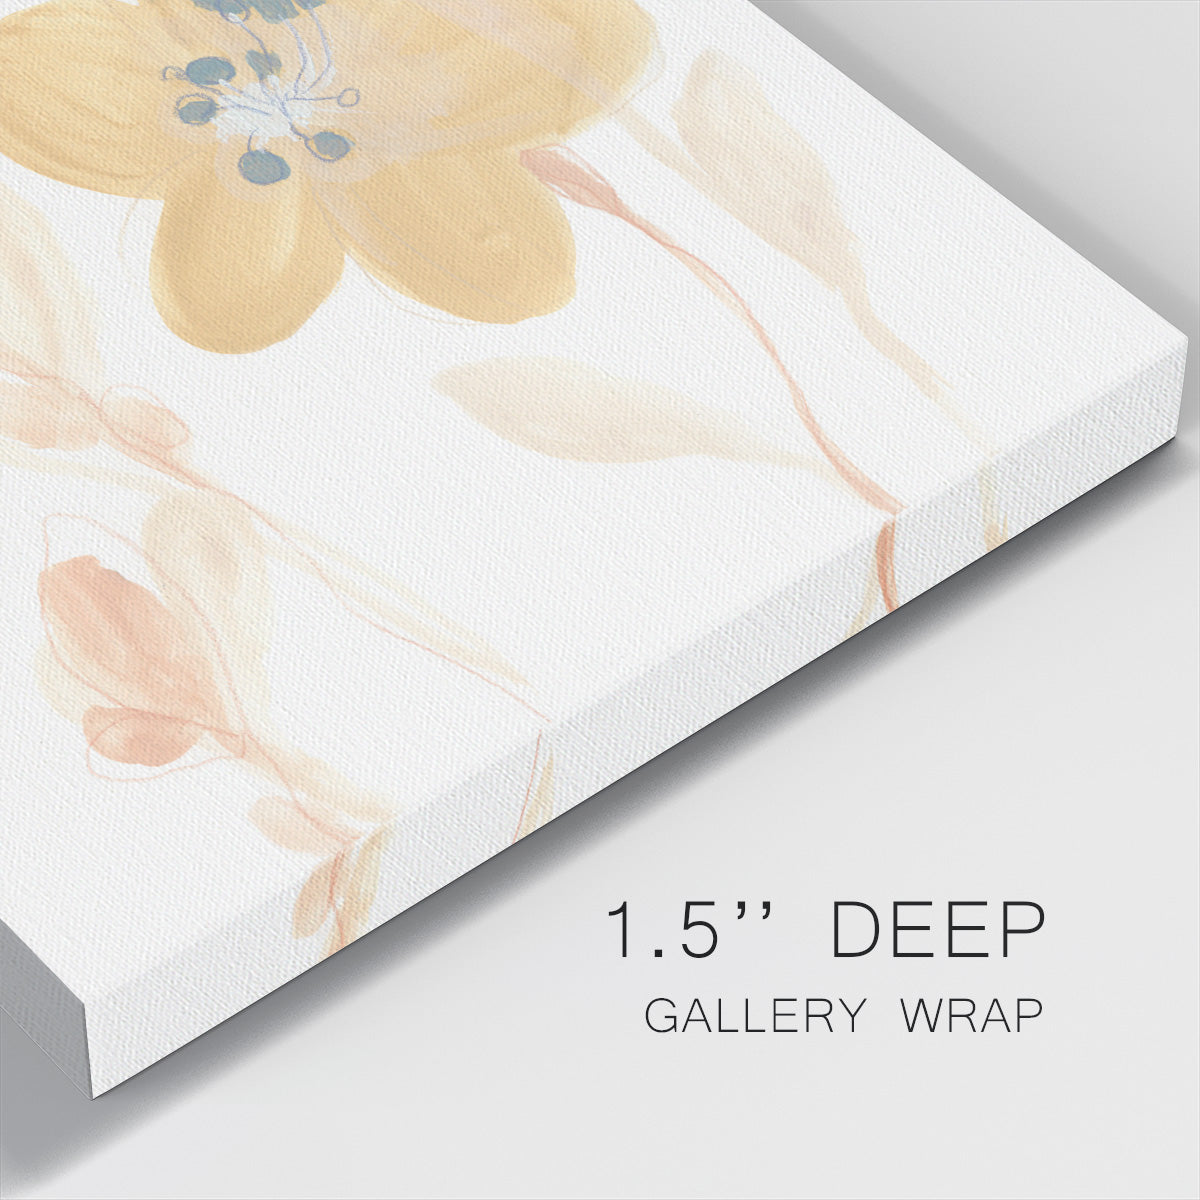 Petite Petals III-Premium Gallery Wrapped Canvas - Ready to Hang